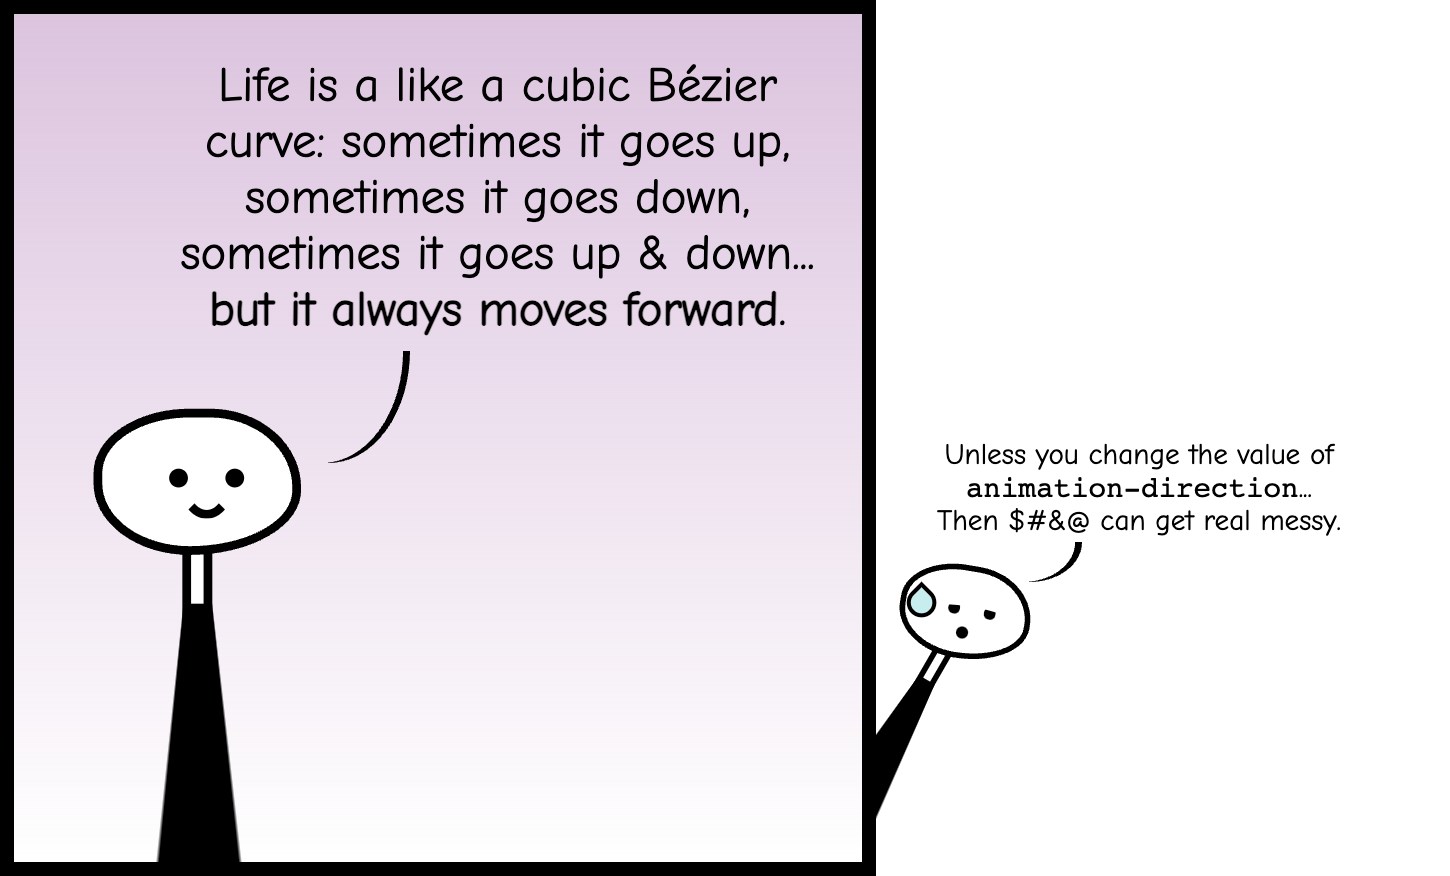 A cartoonish character says 'Life is a like a cubic Bézier curve: sometimes it goes up, sometimes it goes down, sometimes it goes up & down... but it always moves forward.'. A smaller version of it pops up outside the panel saying 'Unless you change the value of animation-direction... then things can get real messy.'